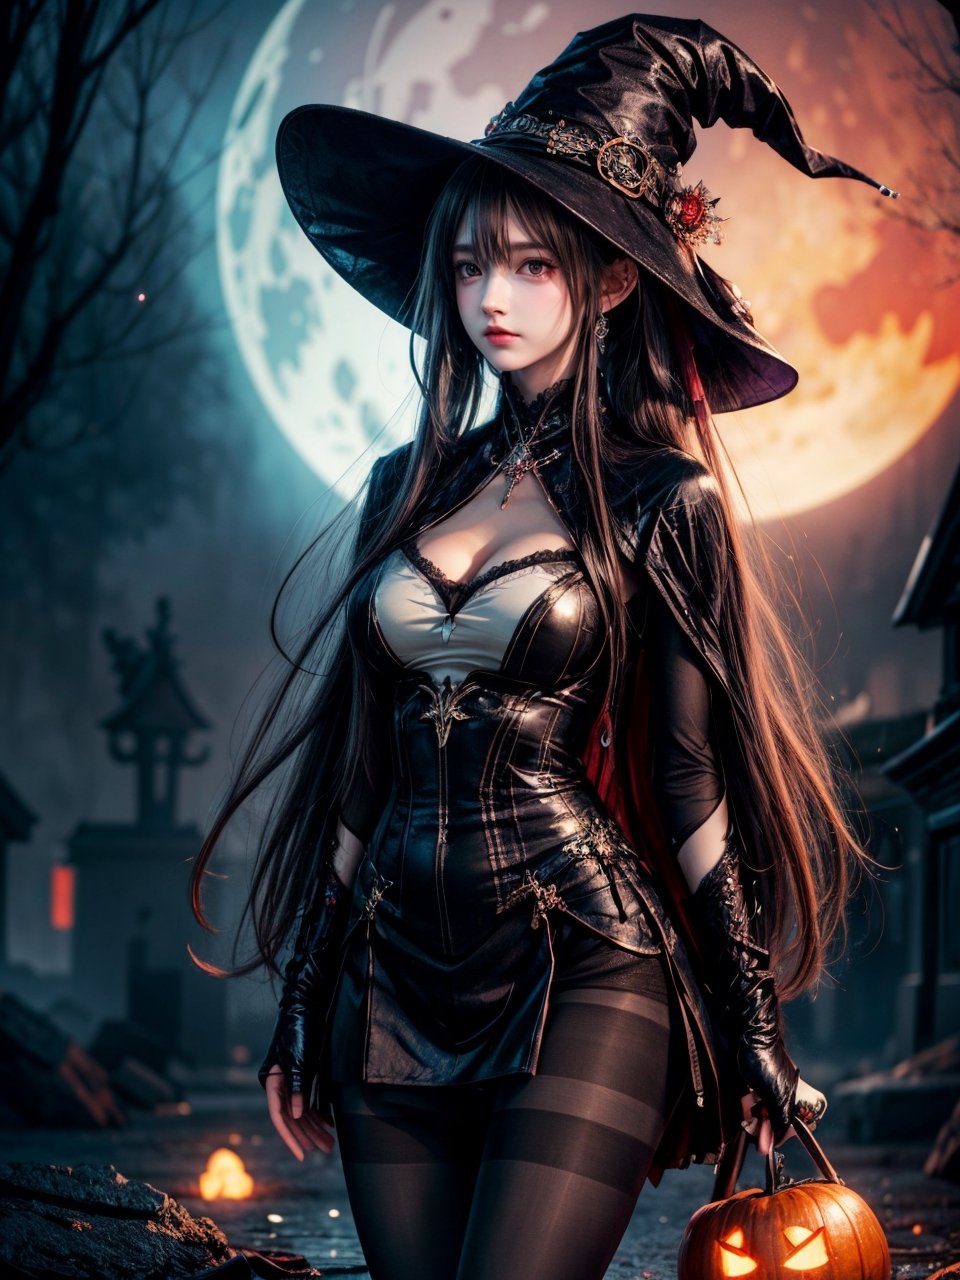 (((Whole_body_from_far_away))), (((pantyhose))), A hauntingly beautiful illustration of a witch standing in a spooky graveyard under a blood-red moon. witch hat, The scene should be cinematic with Jack-o-lantern shining. The witch should be portrayed with fine details and realistic shading. The artwork should be in a high resolution and digitally painted by renowned artists like Luis Royo and Jasmine Becket-Griffith. The overall composition should evoke a sense of mystery and enchantment.